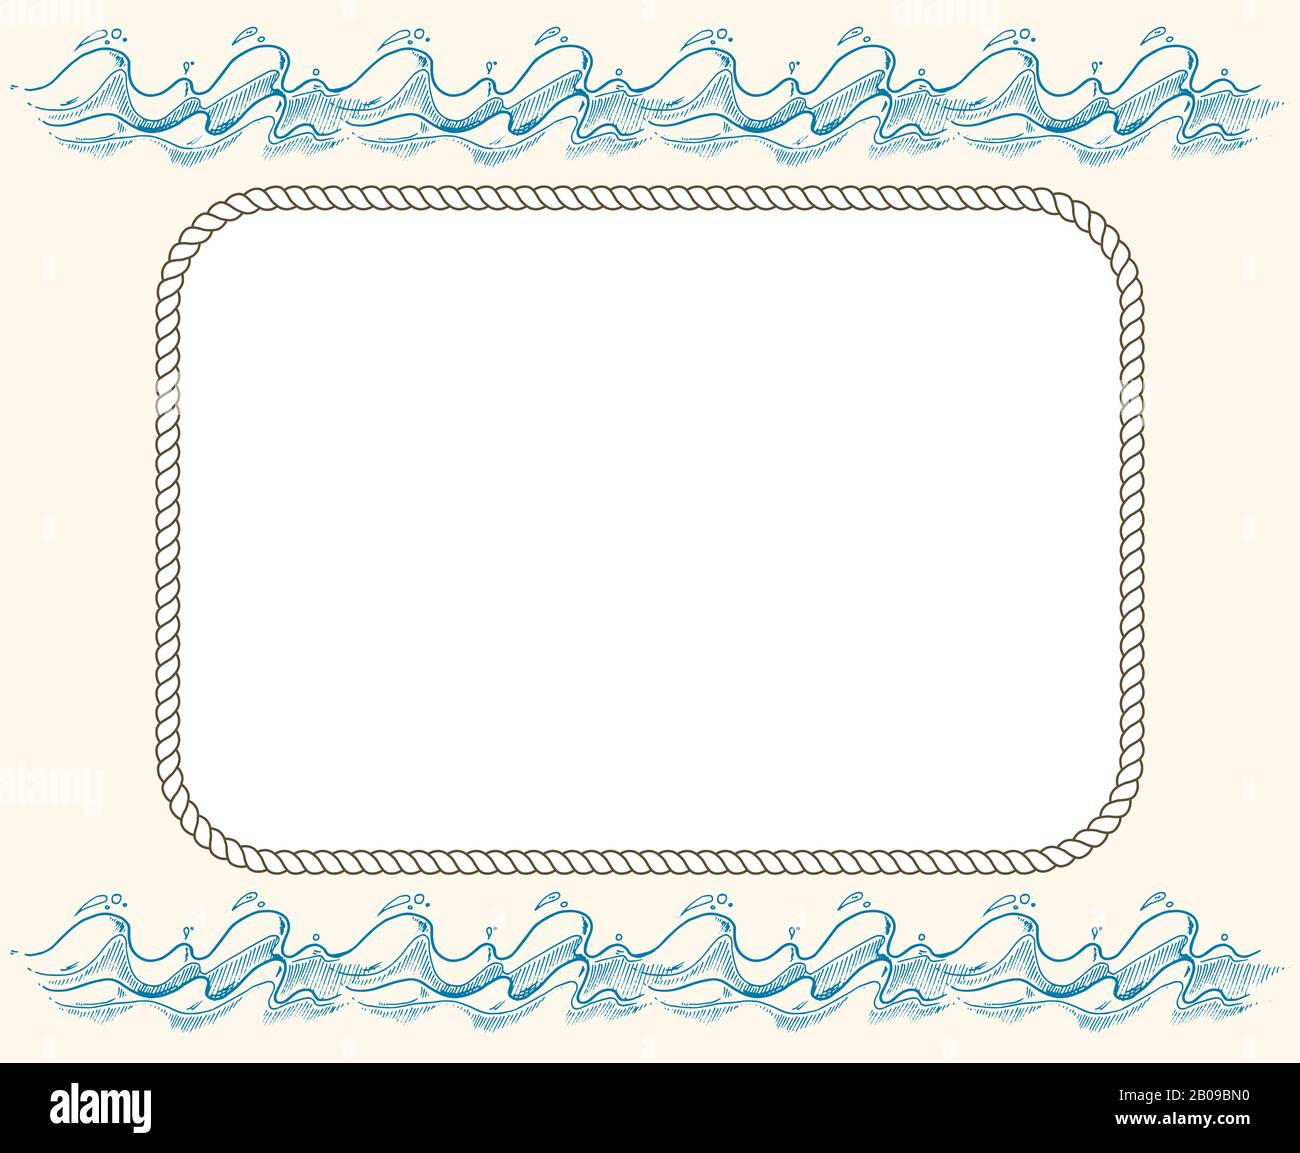 Nautical vector frame with ropes and blue waves. Vintage template of frame illustration Stock Vector